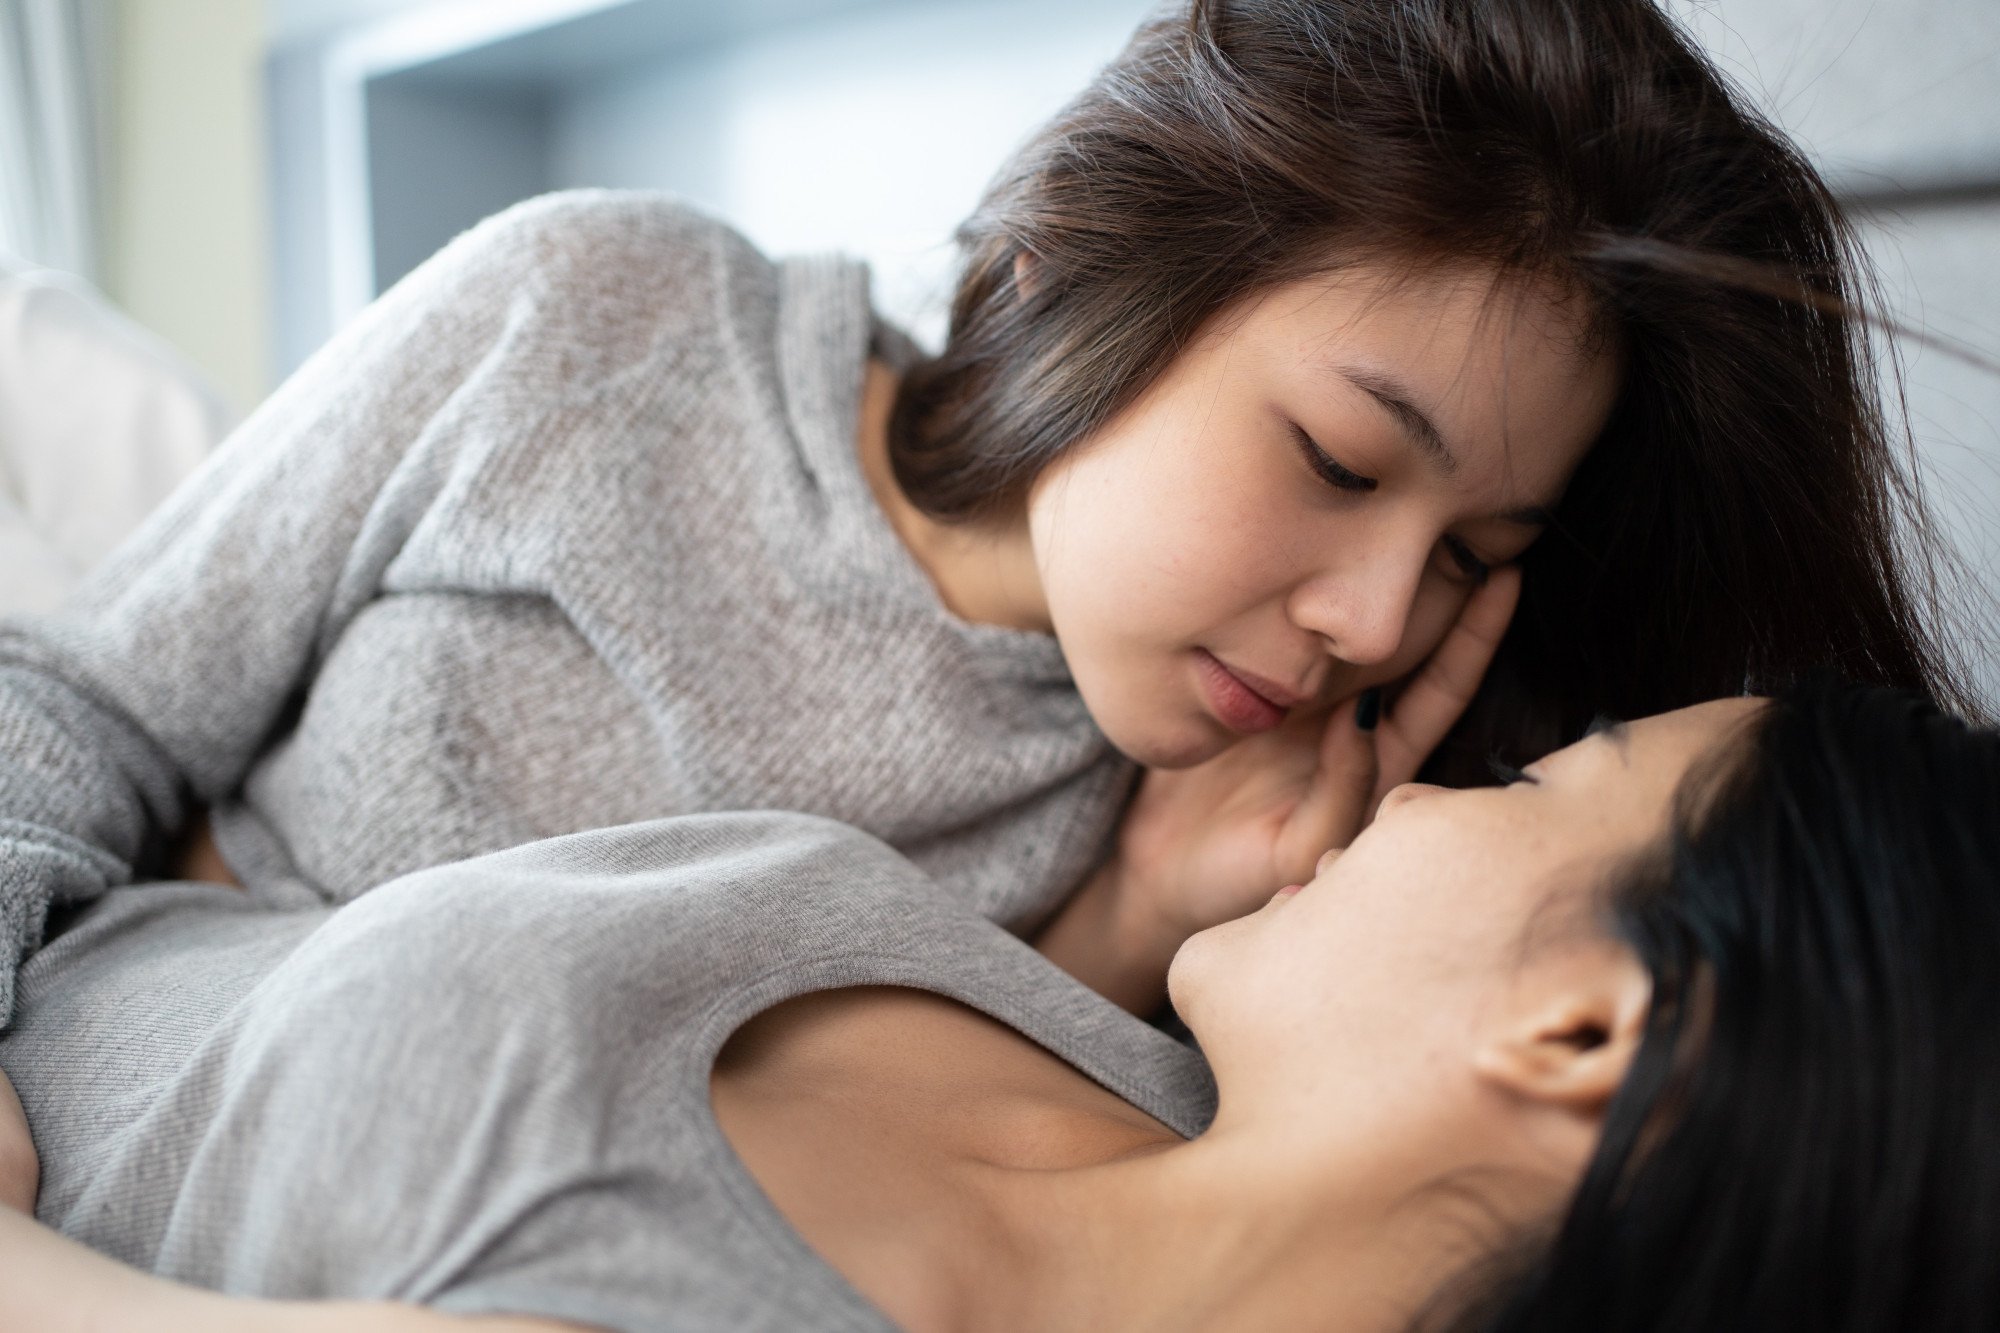 Lee says she has seen how a lack of sex education can harm an individual’s attitude towards their sexual health, including their ability to achieve an orgasm when they are by themselves or with partners. Photo: Shutterstock